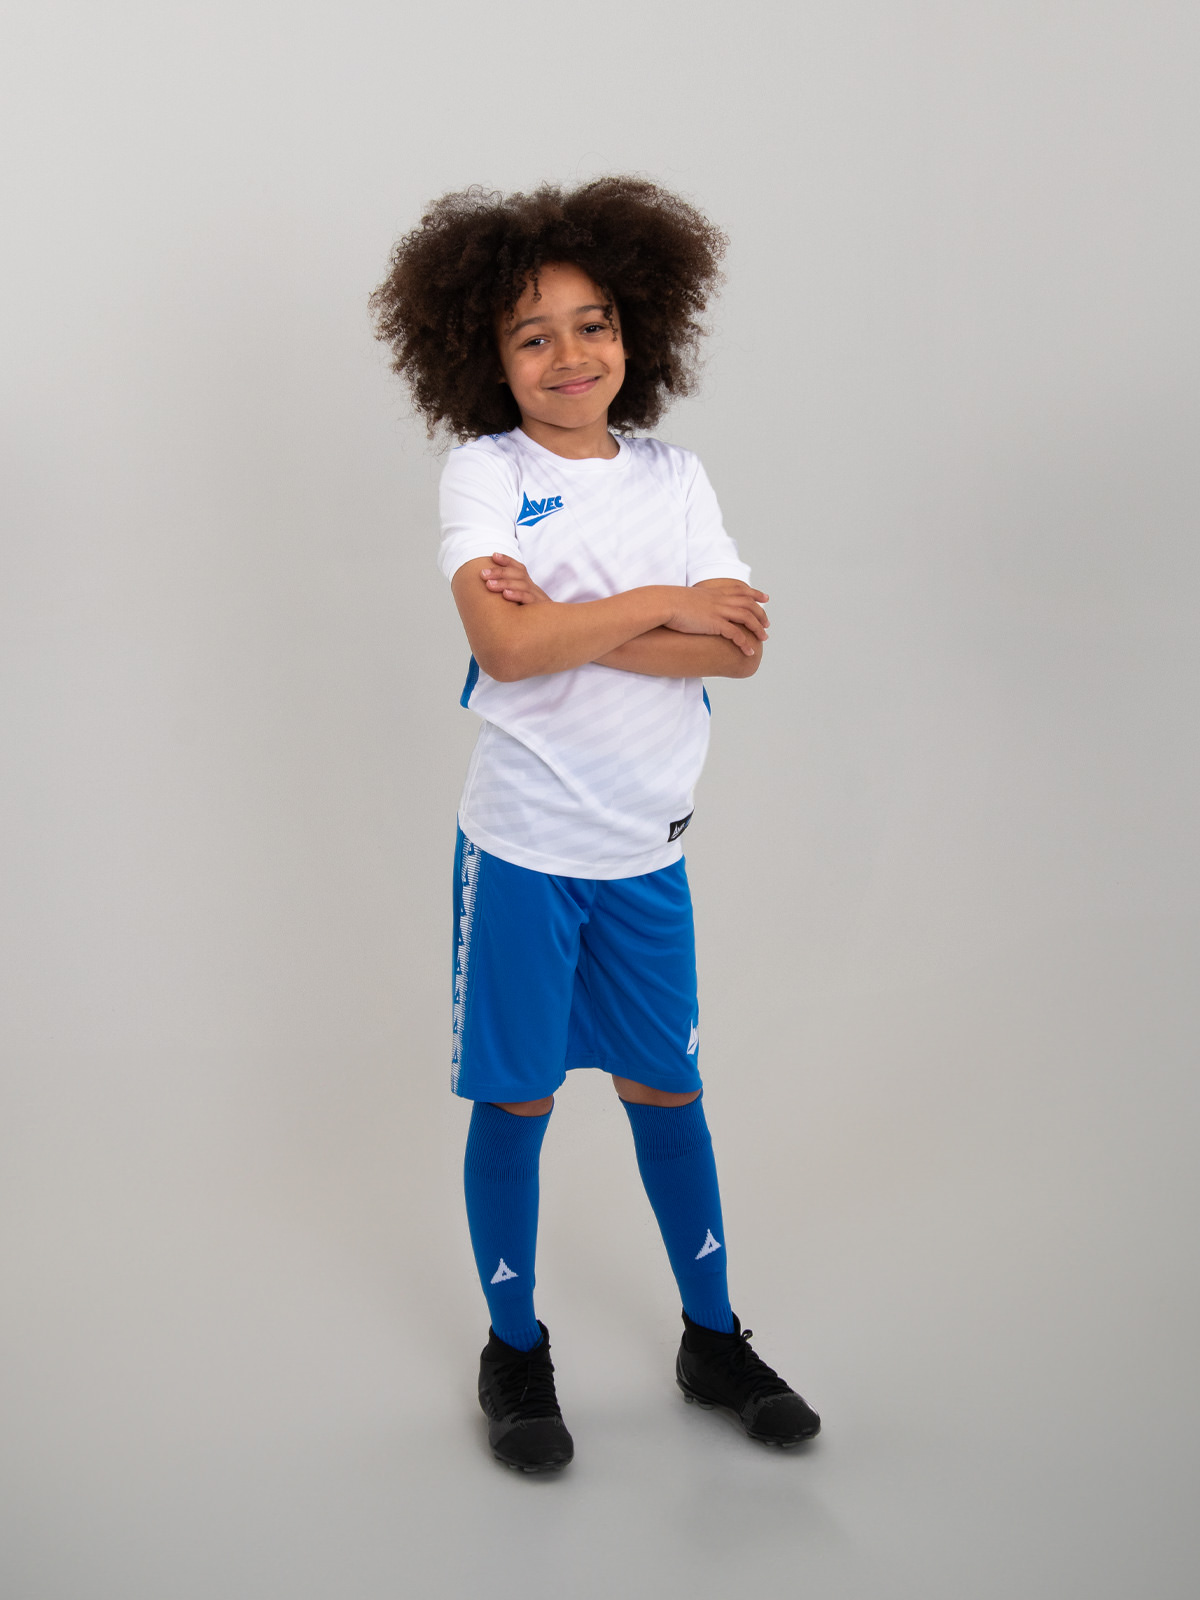 a young child is wearing a white and blue football kit